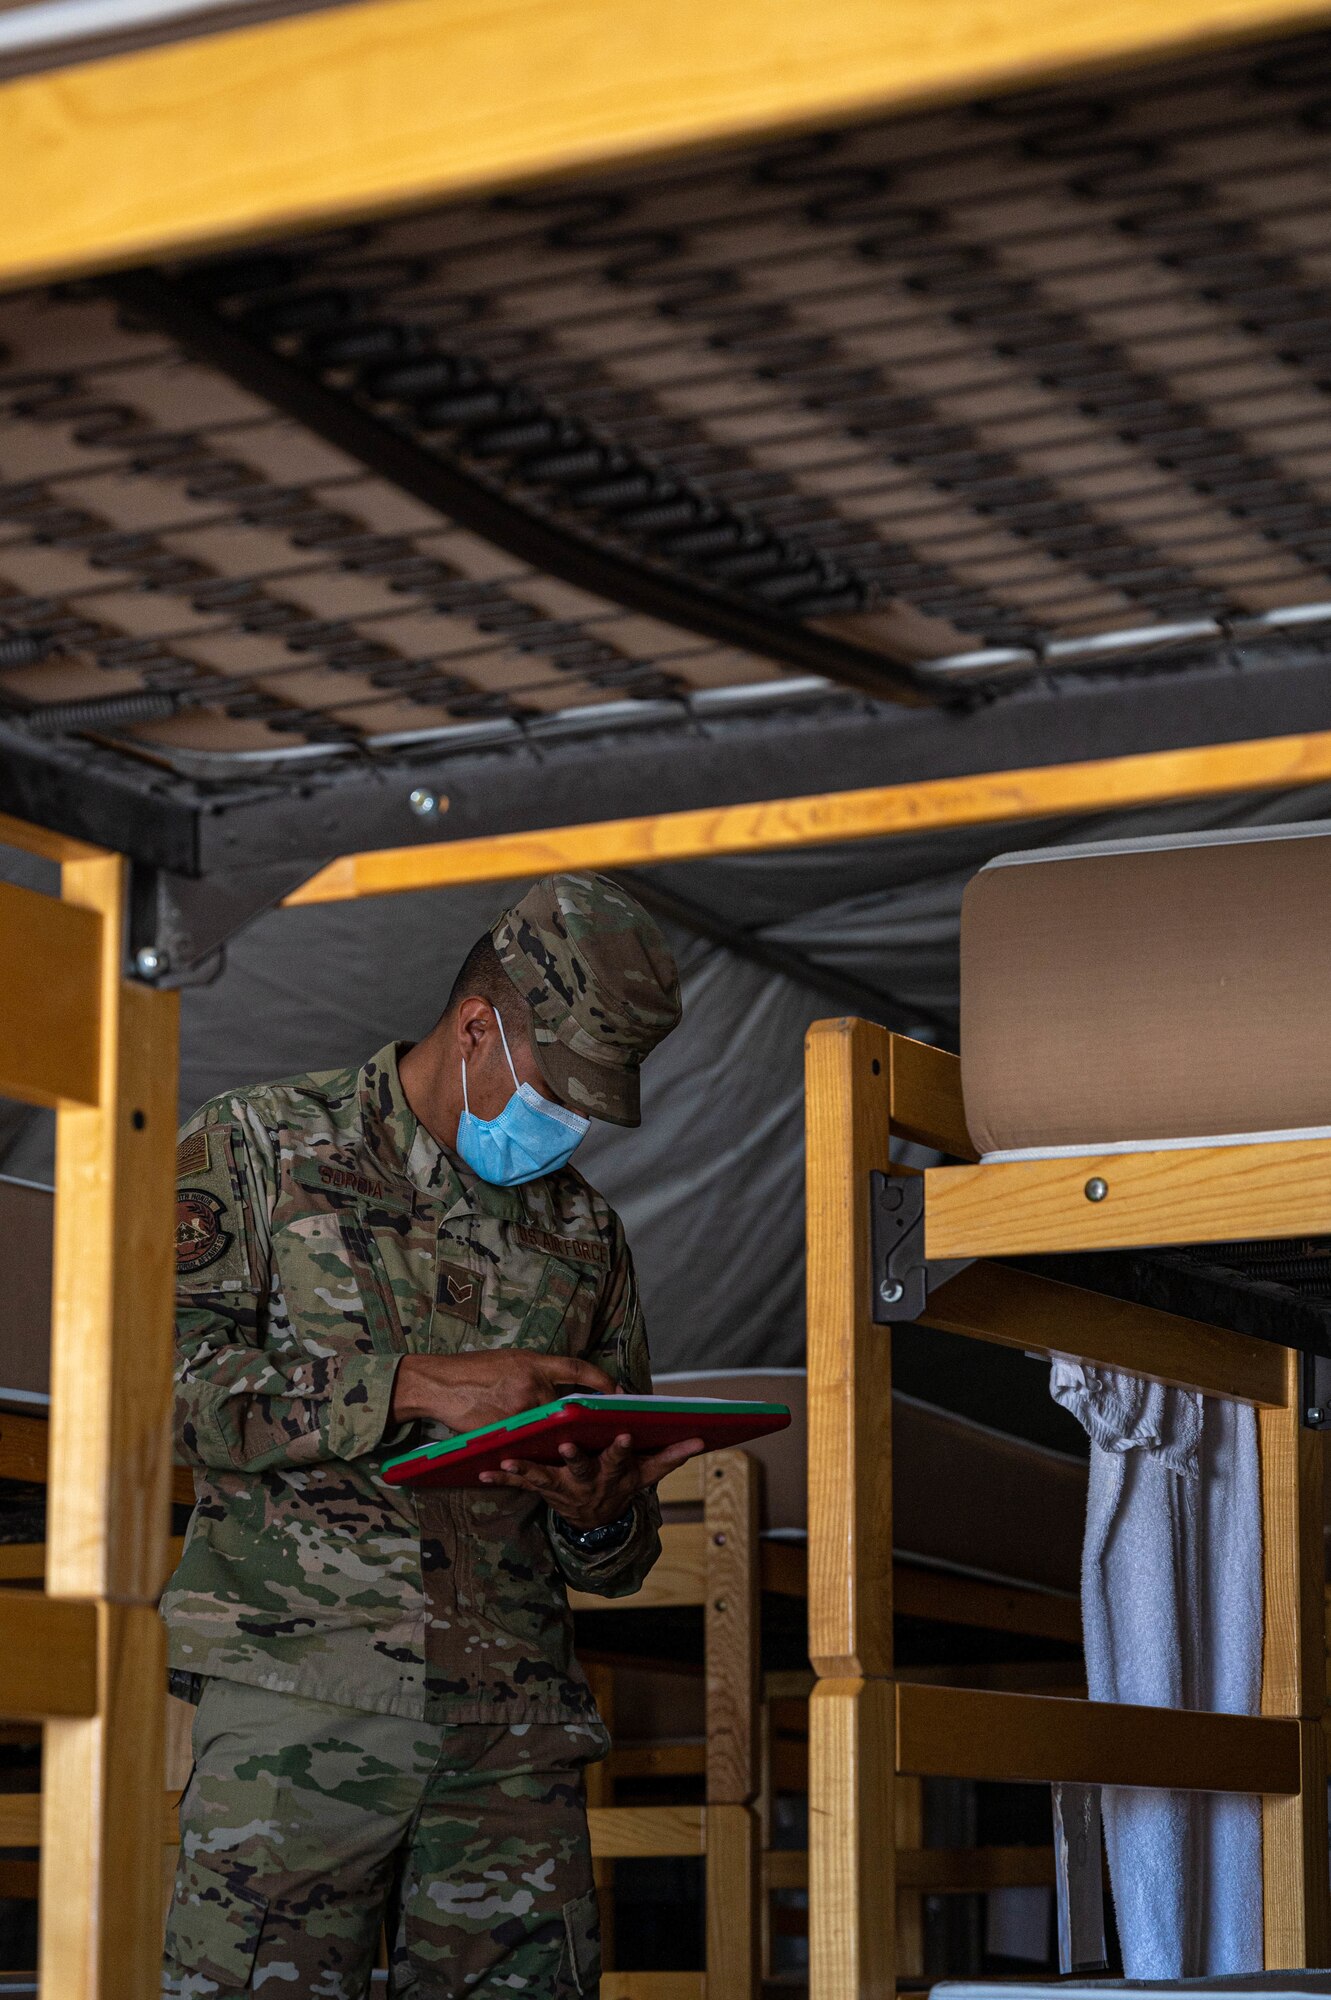 Besides ensuring everyone on base has sheets, pillows and other toiletries, the 386 EFSS lodging office also assists with work orders when something within their facilities goes wrong. Their facilities, including latrines and laundry units, total around 200 buildings.